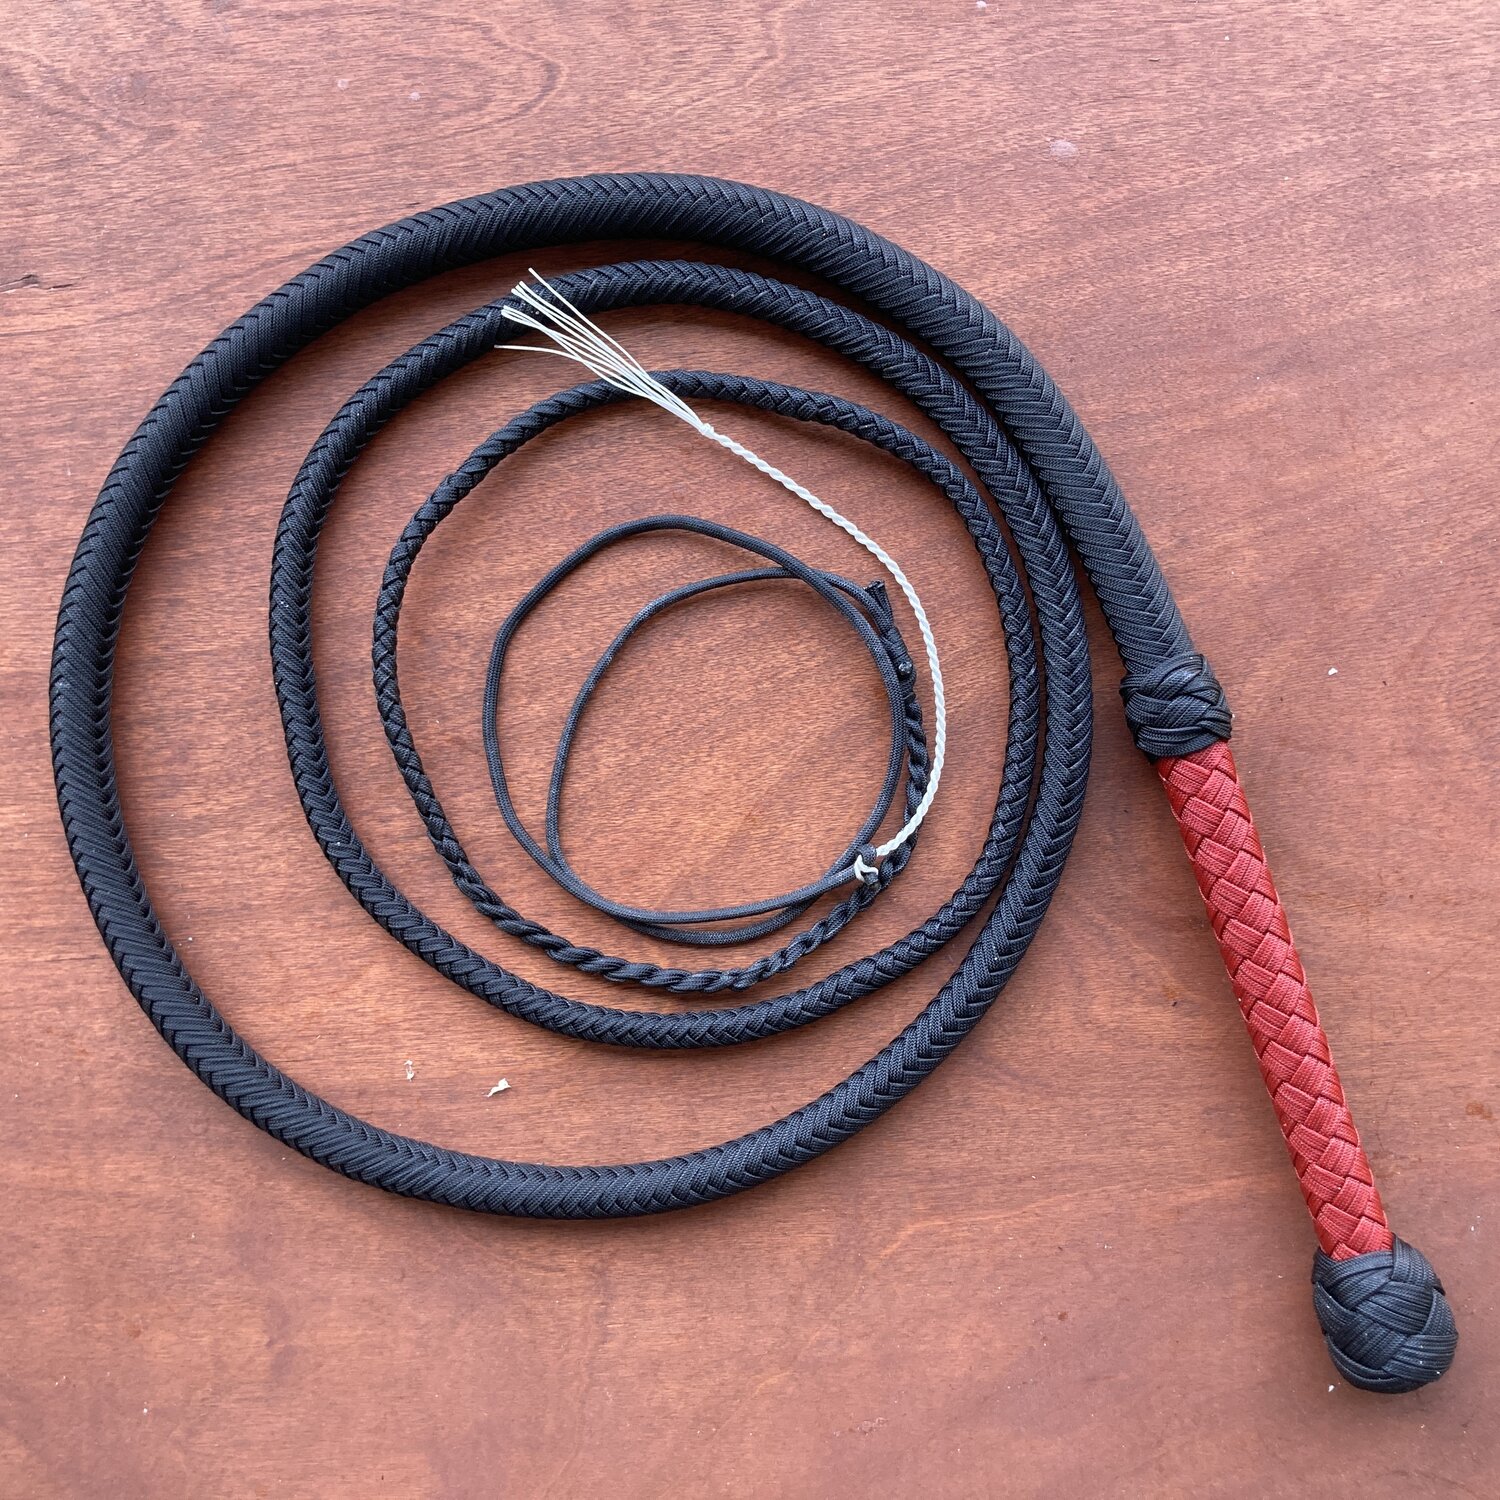 Economy Indy Bull Whips — Swordguy Builds